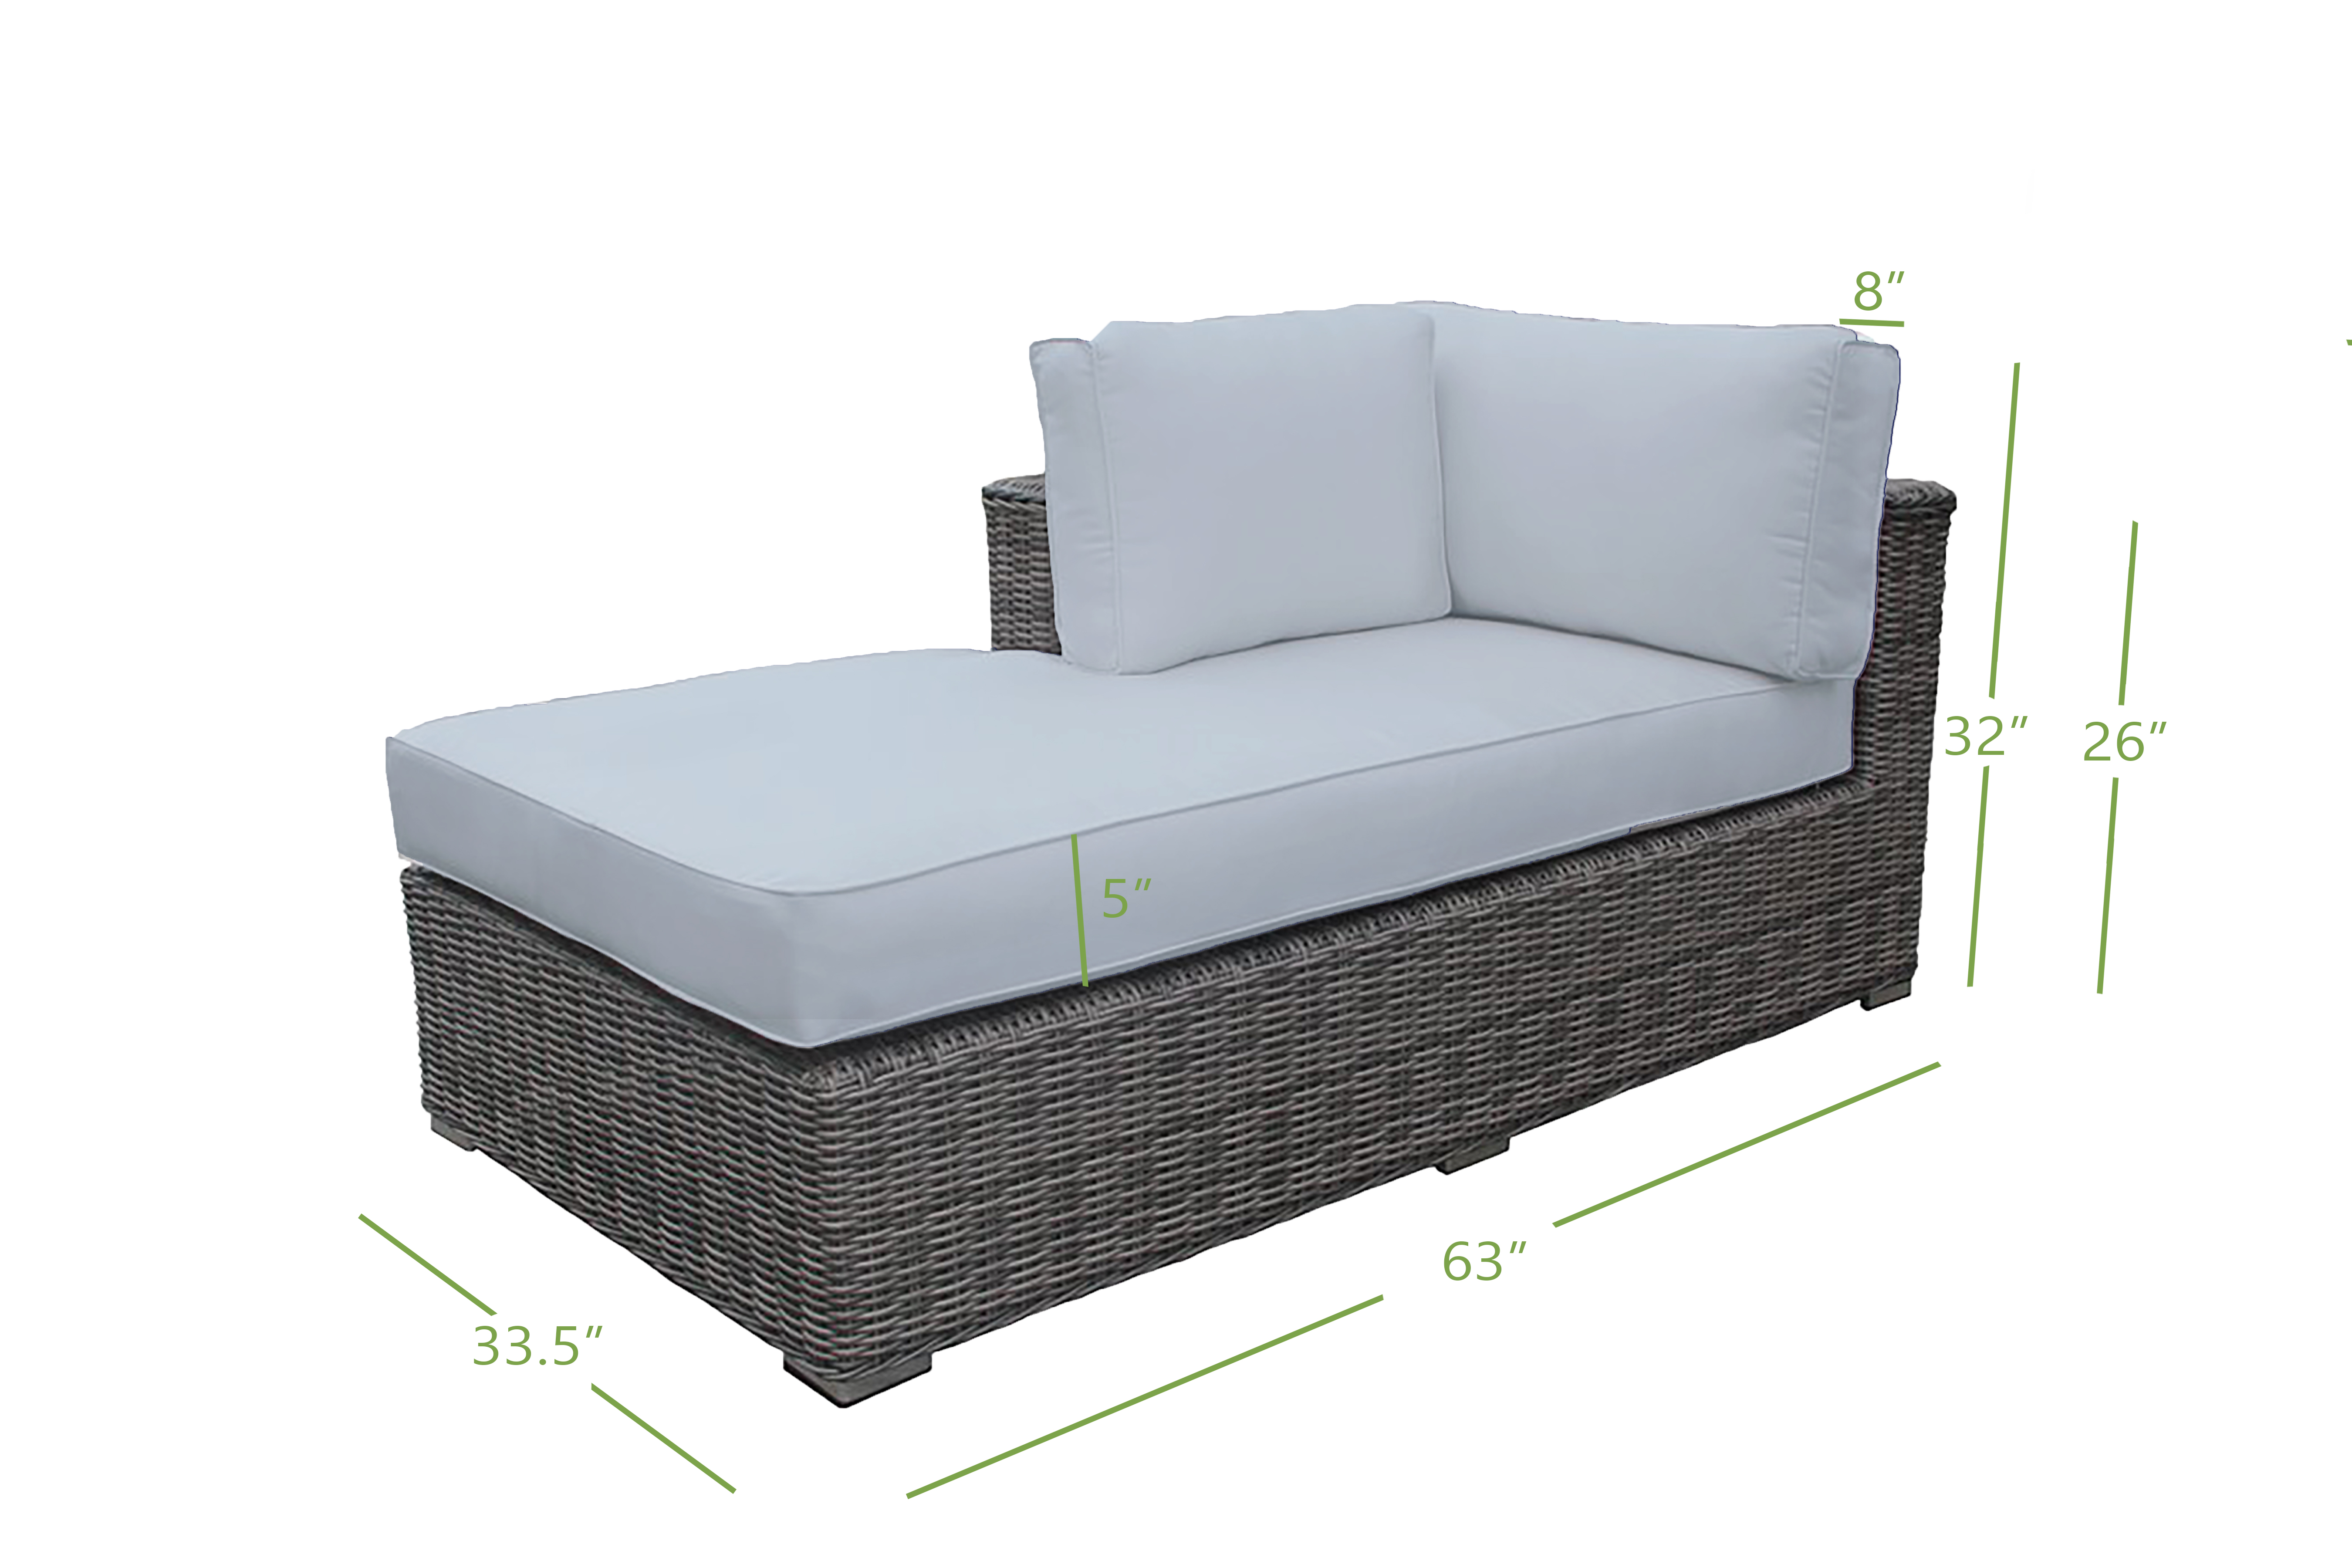 Lounger dimensions